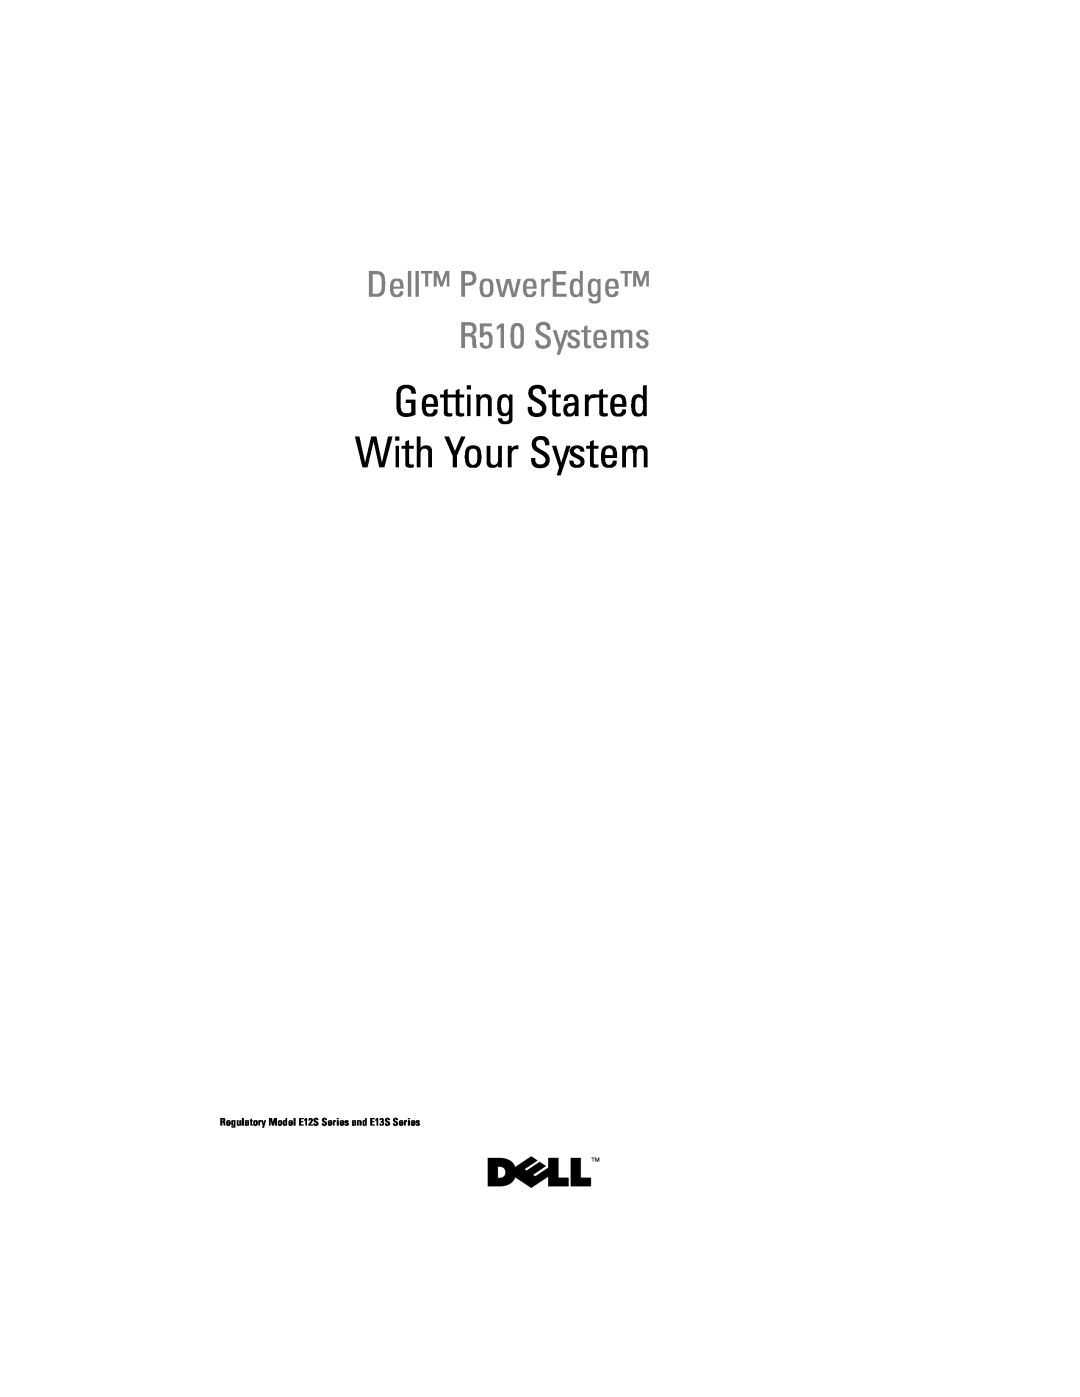 Dell E13S Series, E12S Series, 3YPMN manual Getting Started With Your System, Dell PowerEdge R510 Systems 